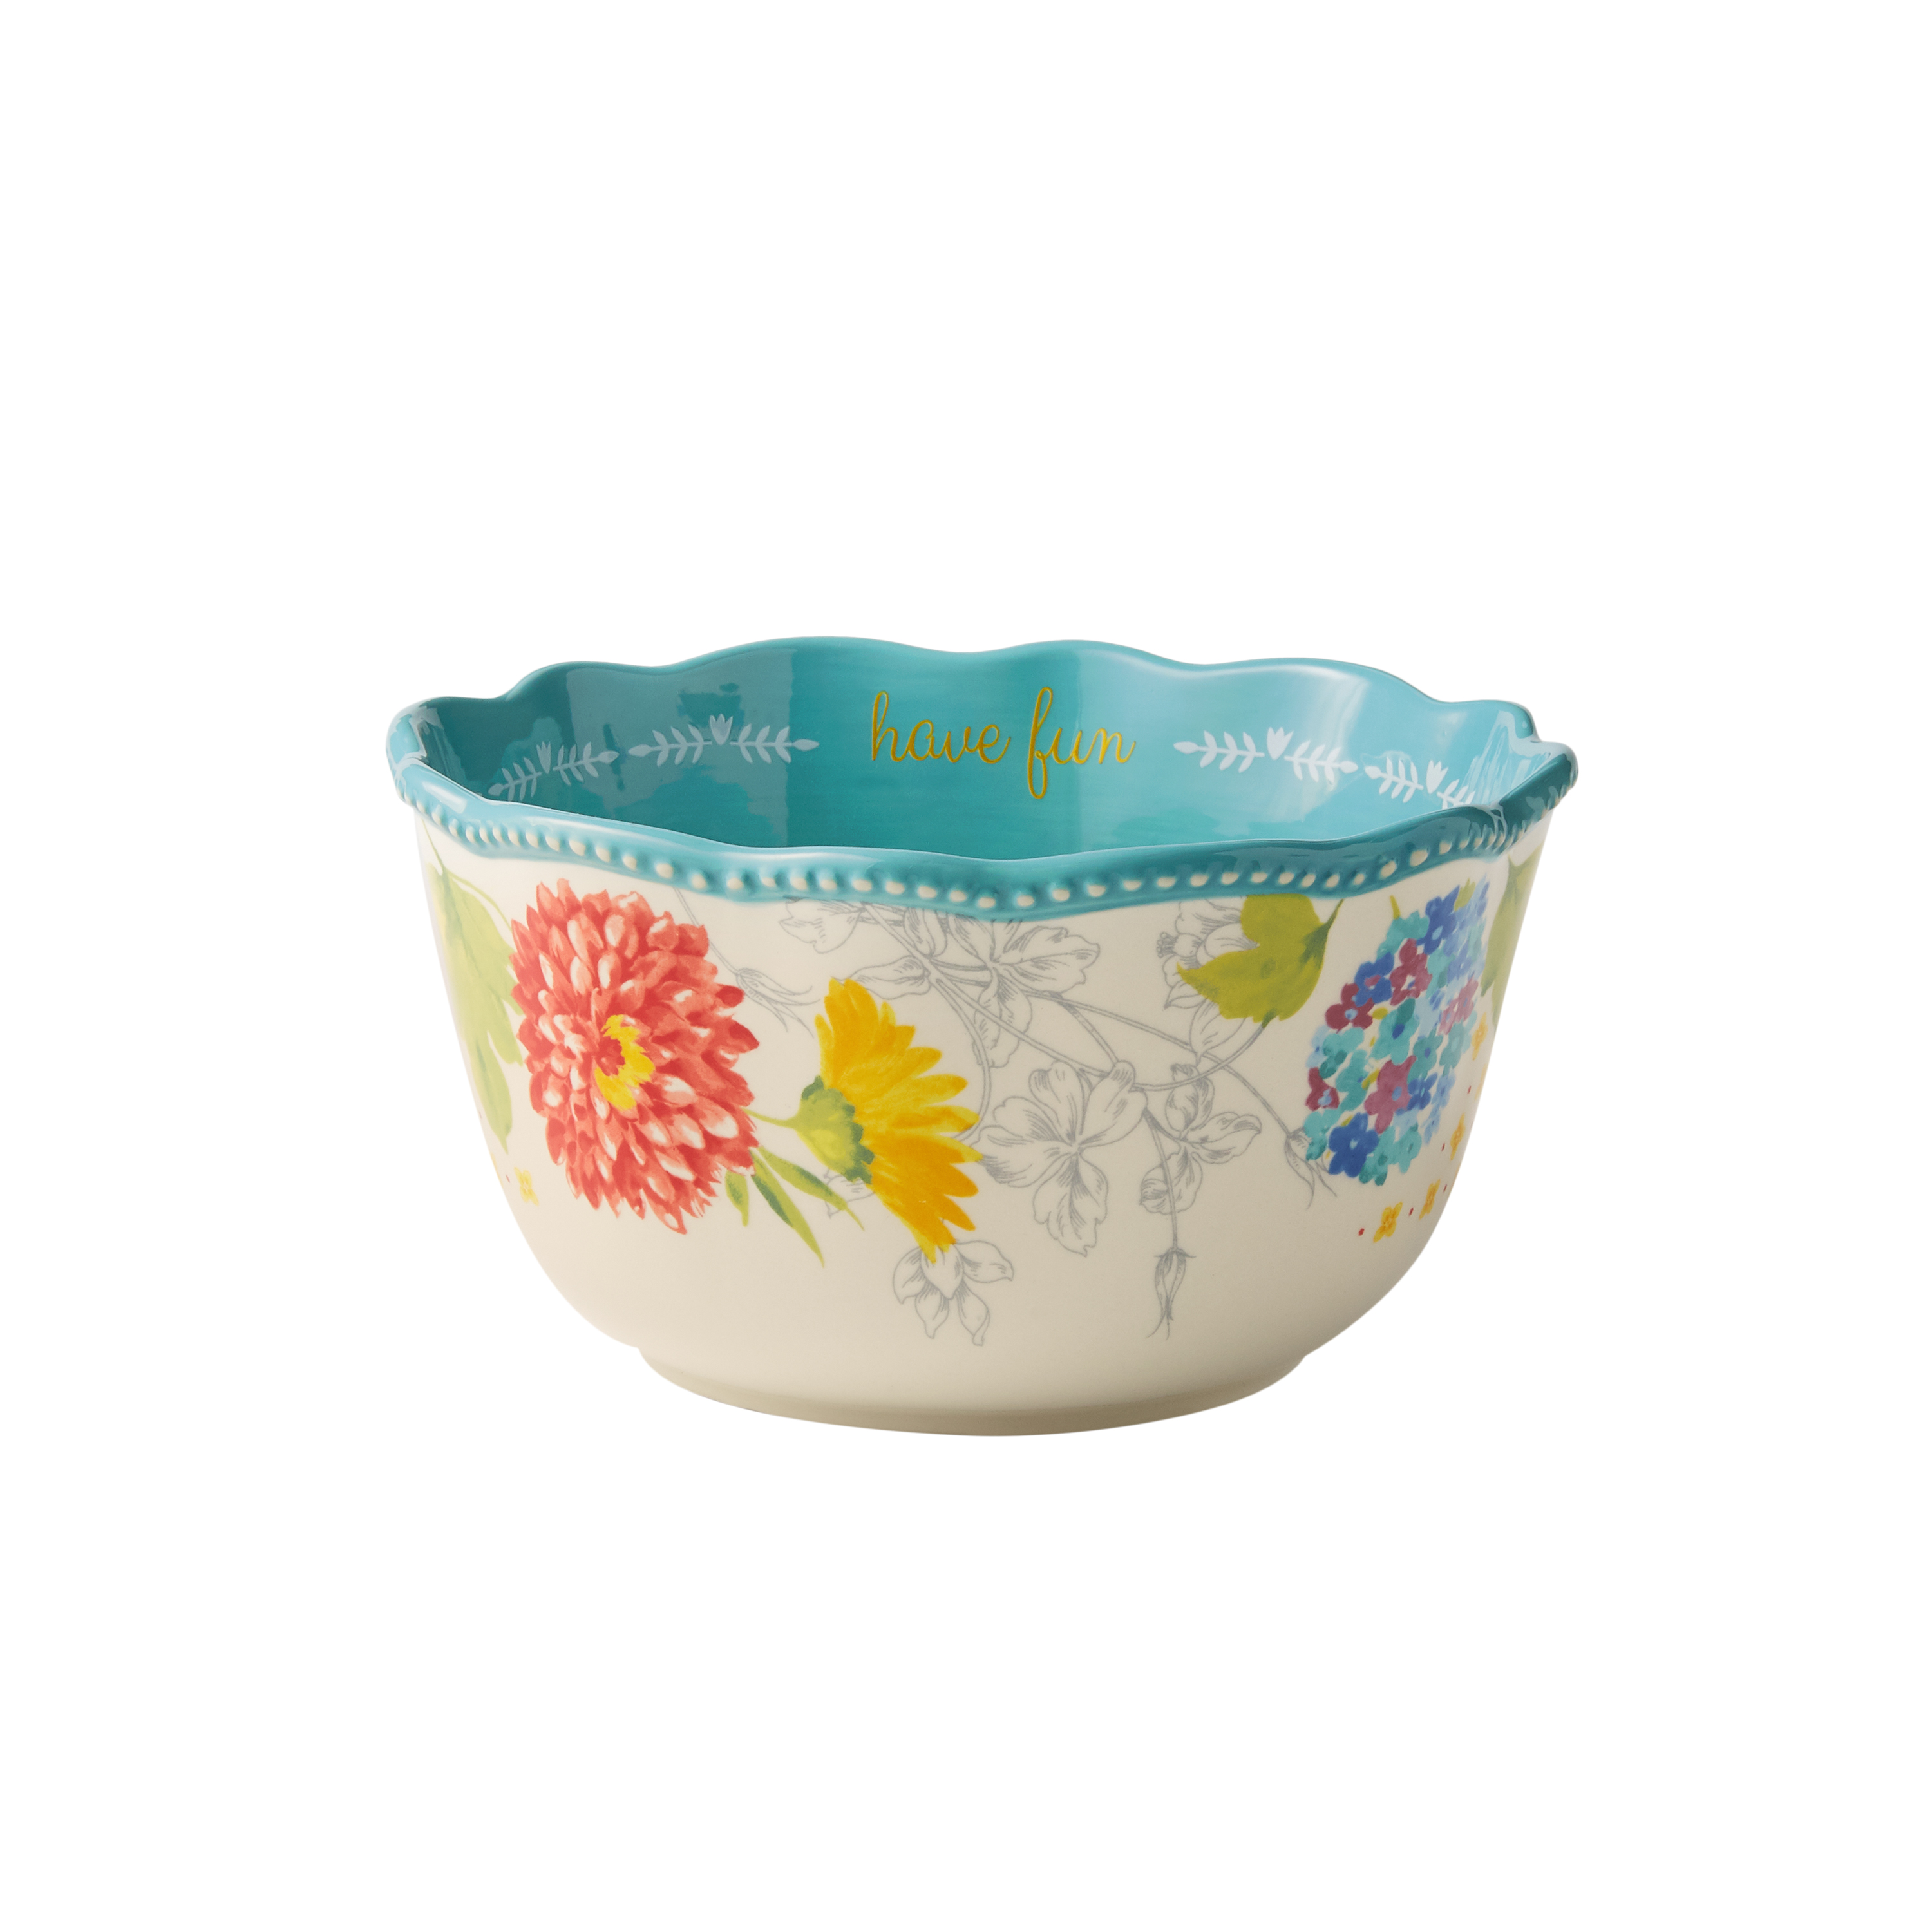 The Pioneer Woman Sweet Rose Sentiment Serving Bowls, 3-Piece Set - image 2 of 6